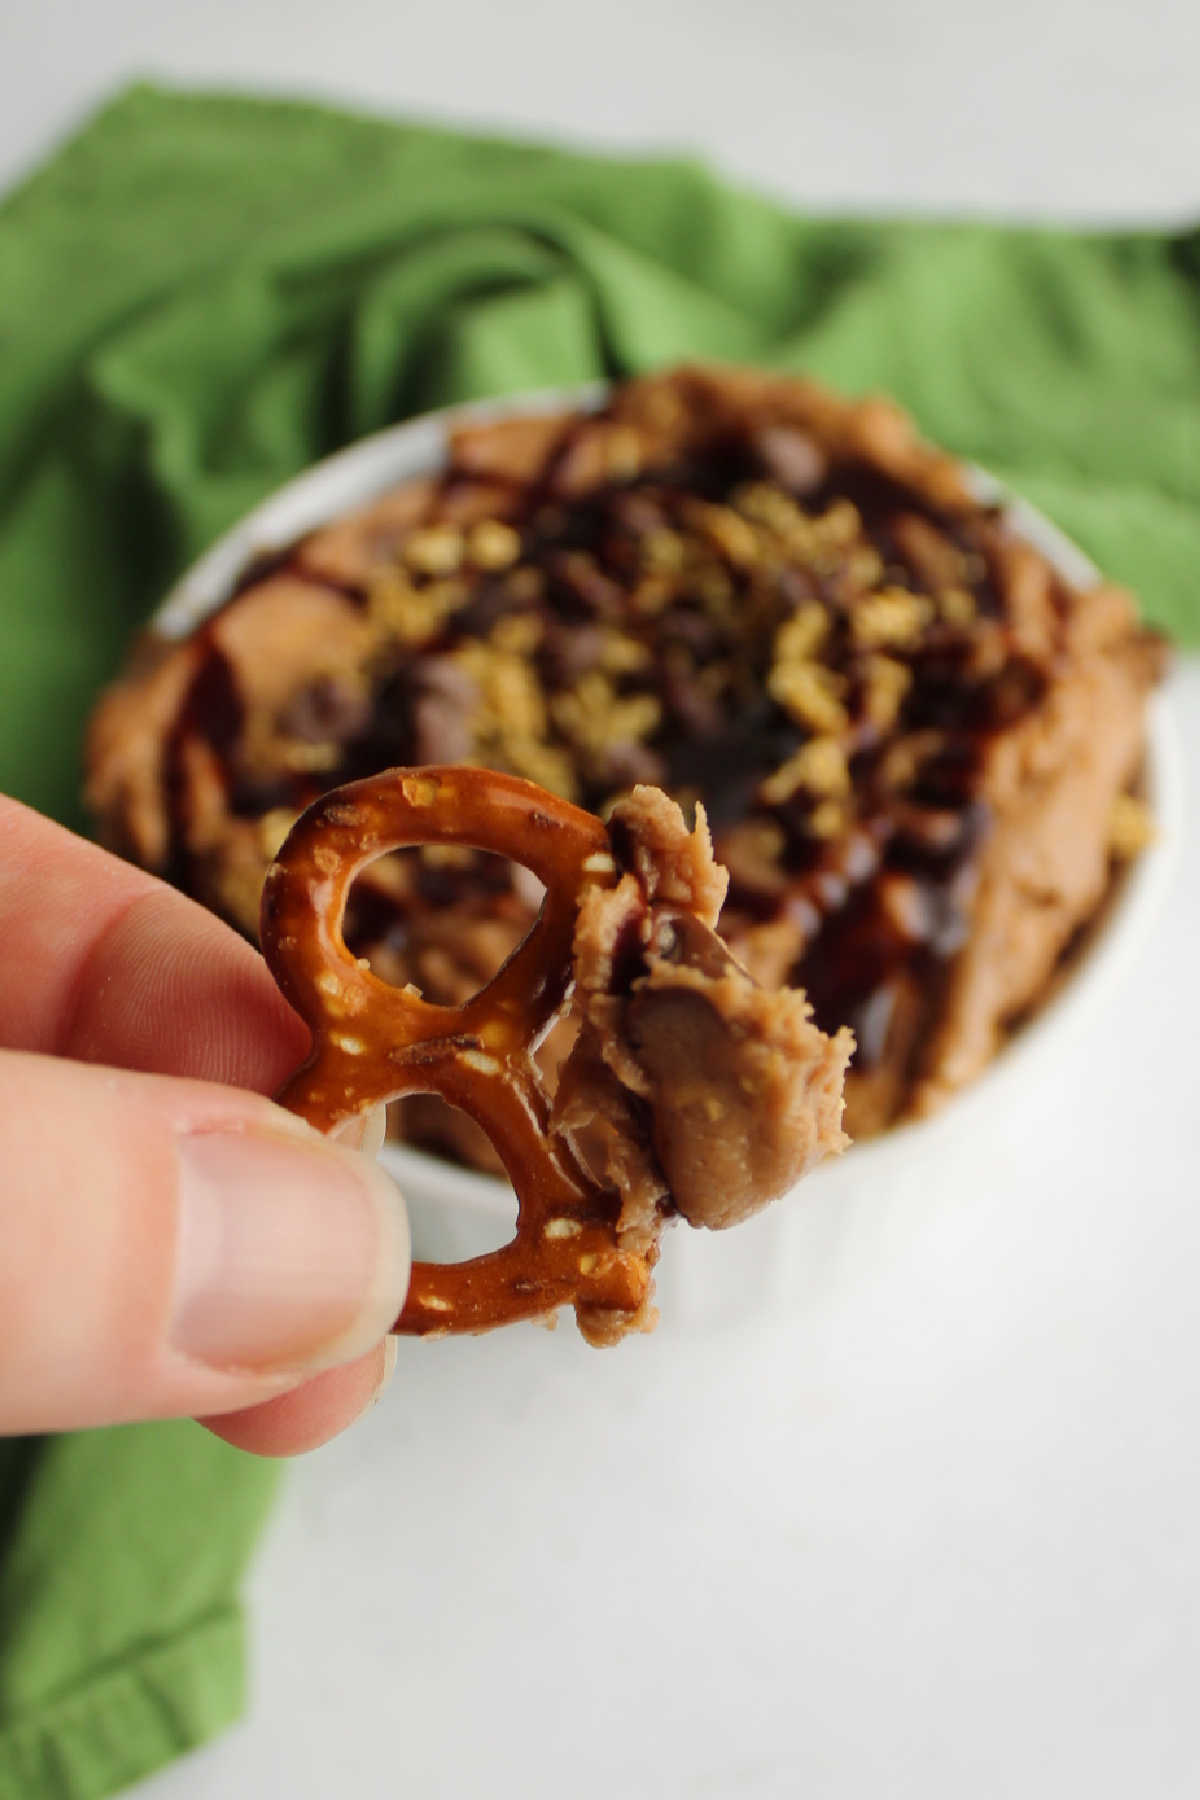 Hand holding pretzel dipped in puppy chow dip.